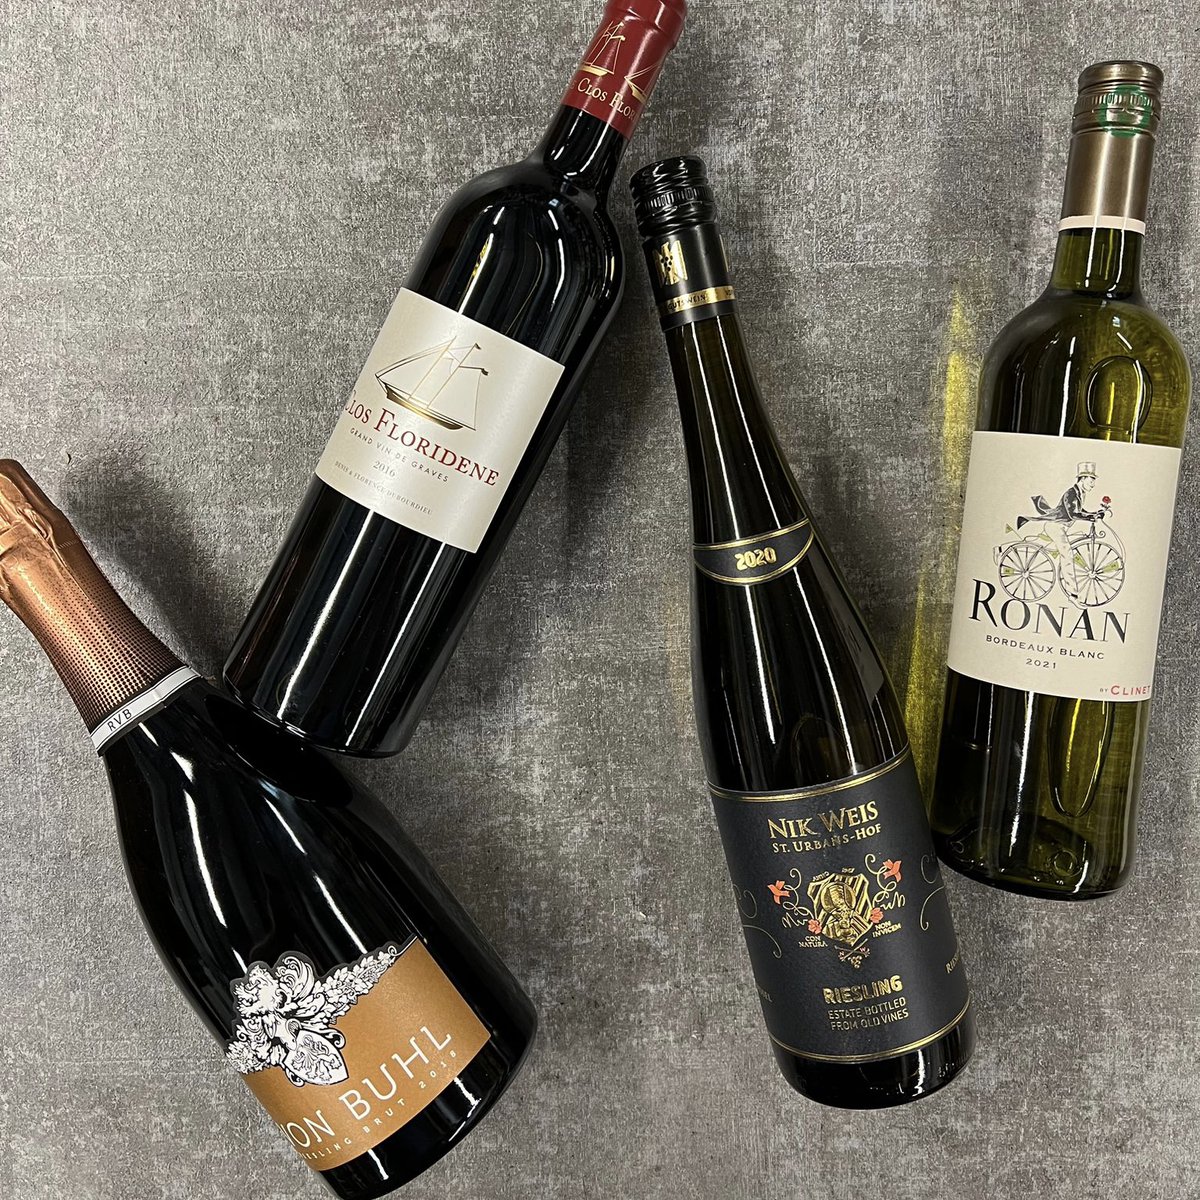 FREE Tasting this Saturday! Come tasting 2 German wines and 2 Bordeaux wines this Saturday at 305 Wines.

Hope to see you then! @clinkdifferent
 #BordeauxWines #305Wines #wineTasting #GermanWines #WineLovers